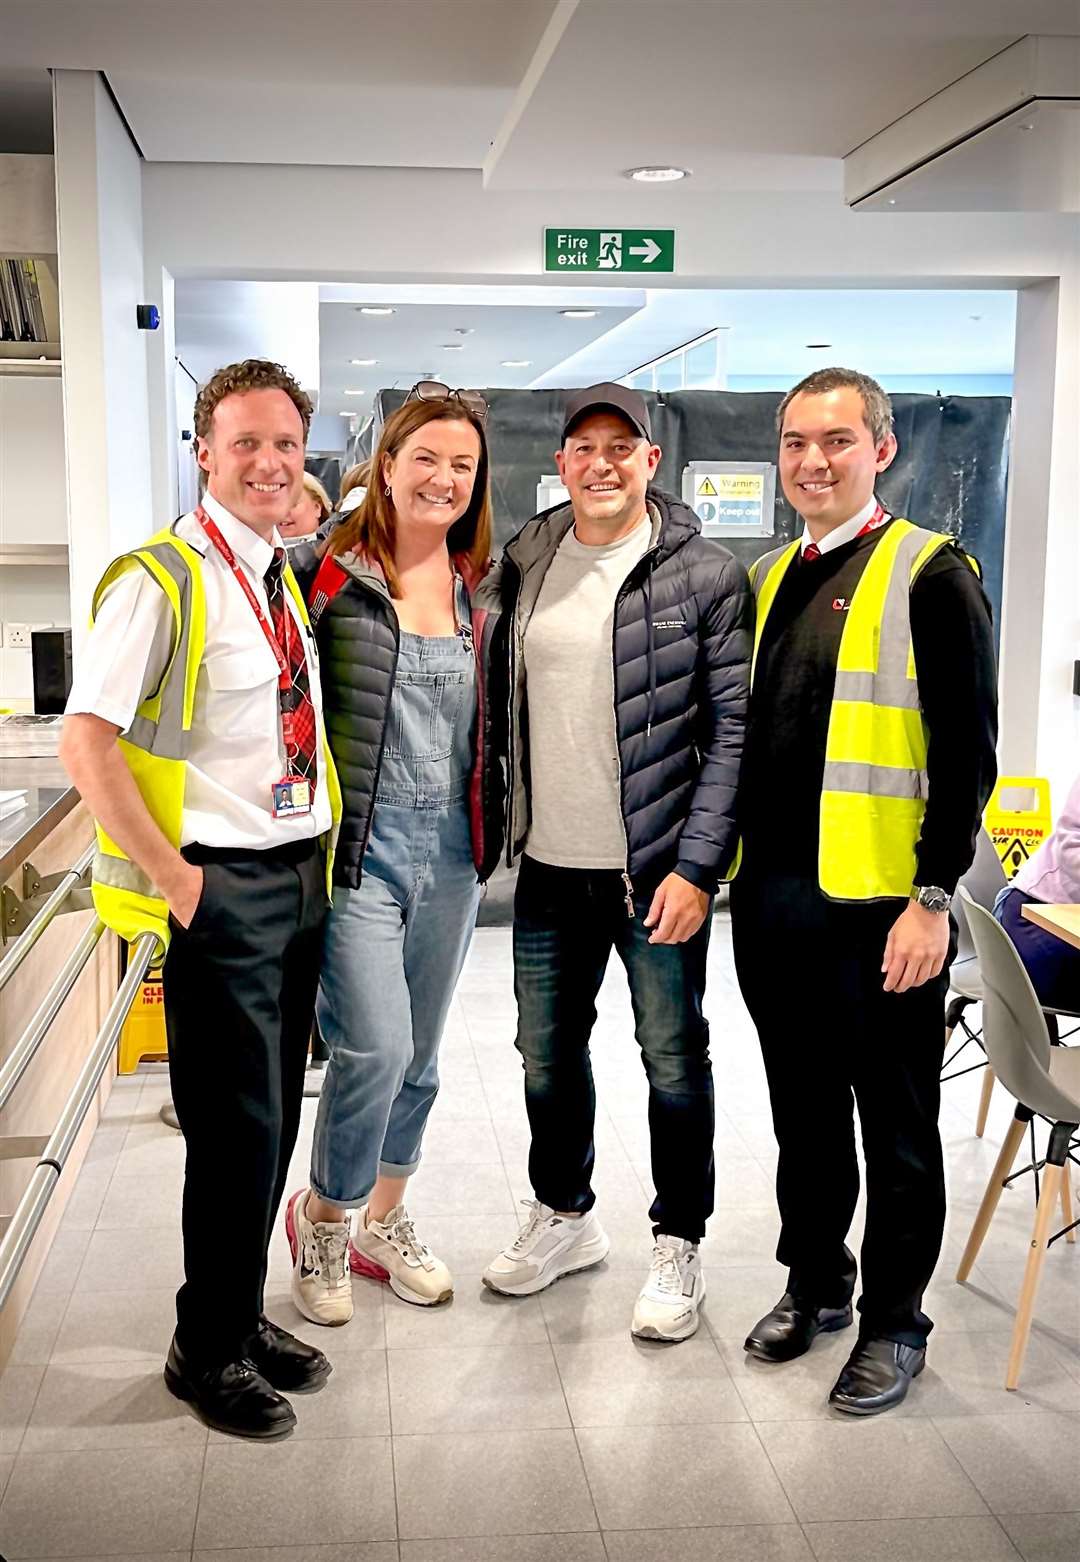 Loganair captain Daniel Tye, left, and first officer James Whitby, right, with Stephen McCann and Bridget Byrne (Stephen McCann/Big Partnership/PA)